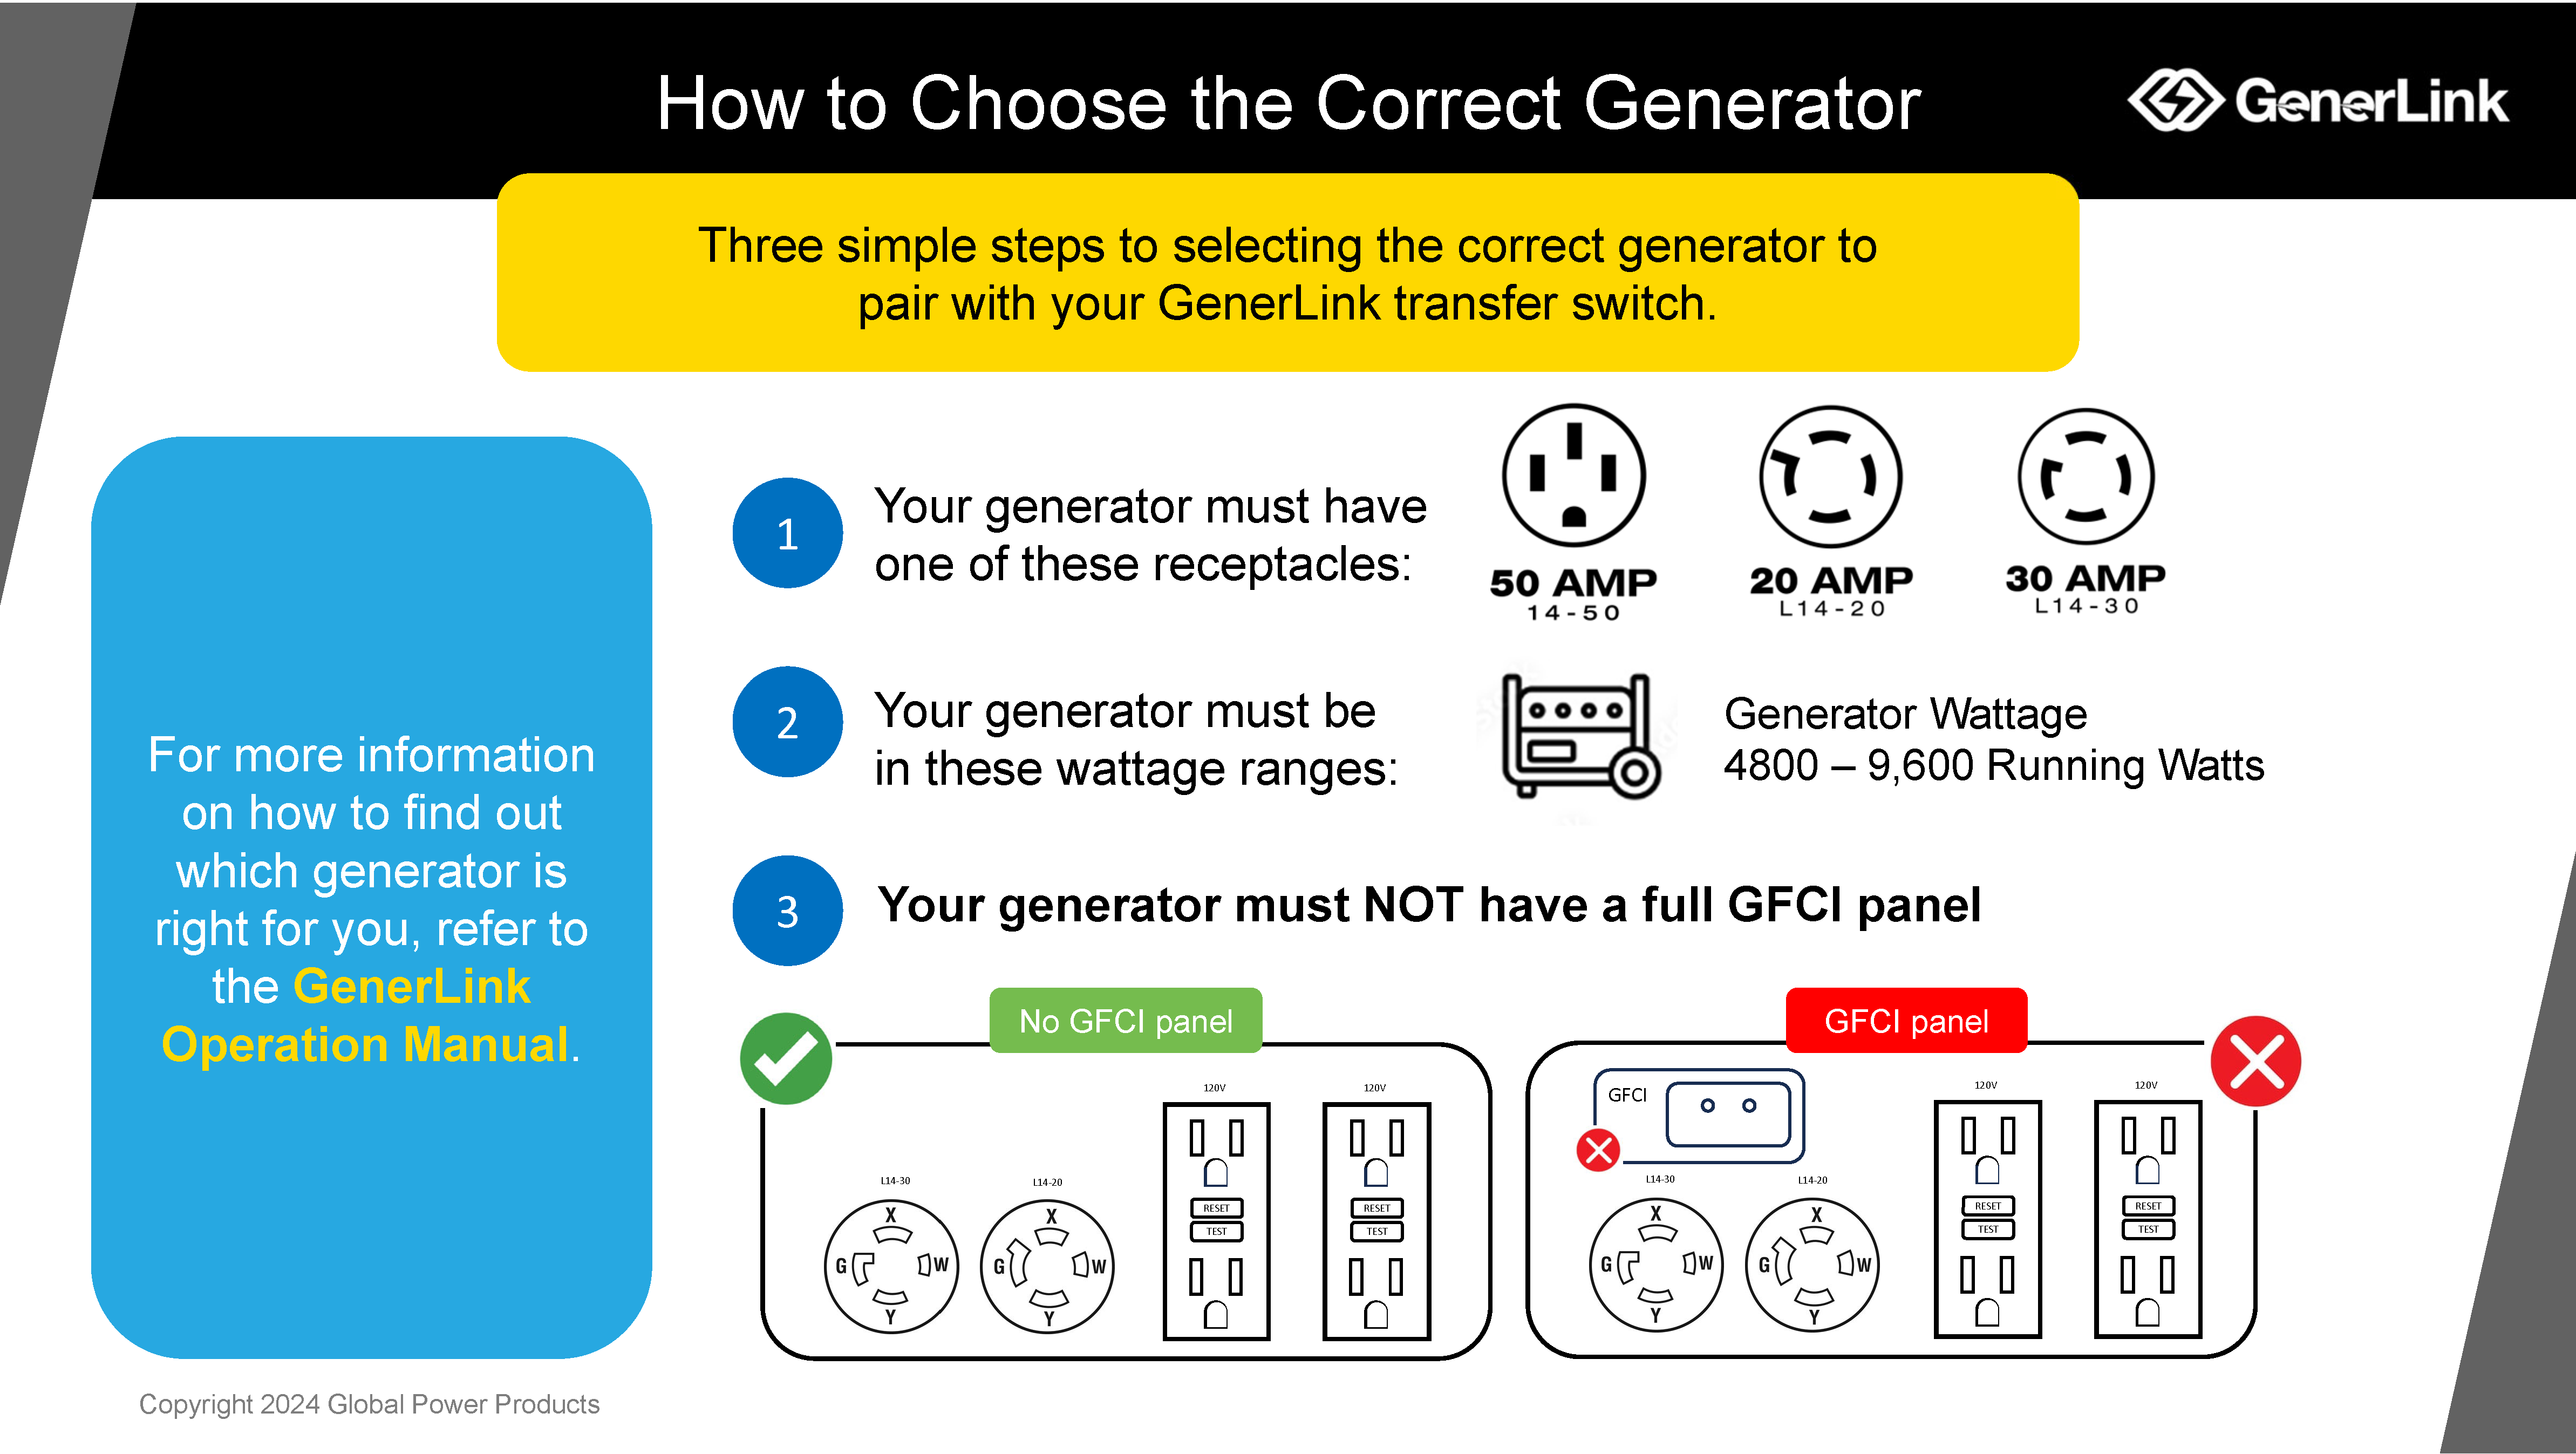 How to Choose the Correct Generator - GenerLink. Three simple steps to selecting the correct generator to pair with your GenerLink transfer switch. 1.) Your generator must have one of these receptacles: 50 AMP 12-50, 20 AMP L14-20, 30 AMP L14-30. 2.) Your generator must be in these wattage ranges: Generator Wattage 4,800 - 9,600 Running Watts. 3.) Your generator must NOT have a full GFCI panel. For more information on how to find which generator is right for you, refer to the GenerLink Operation Manual. Copyright 2024 Global Power Product.